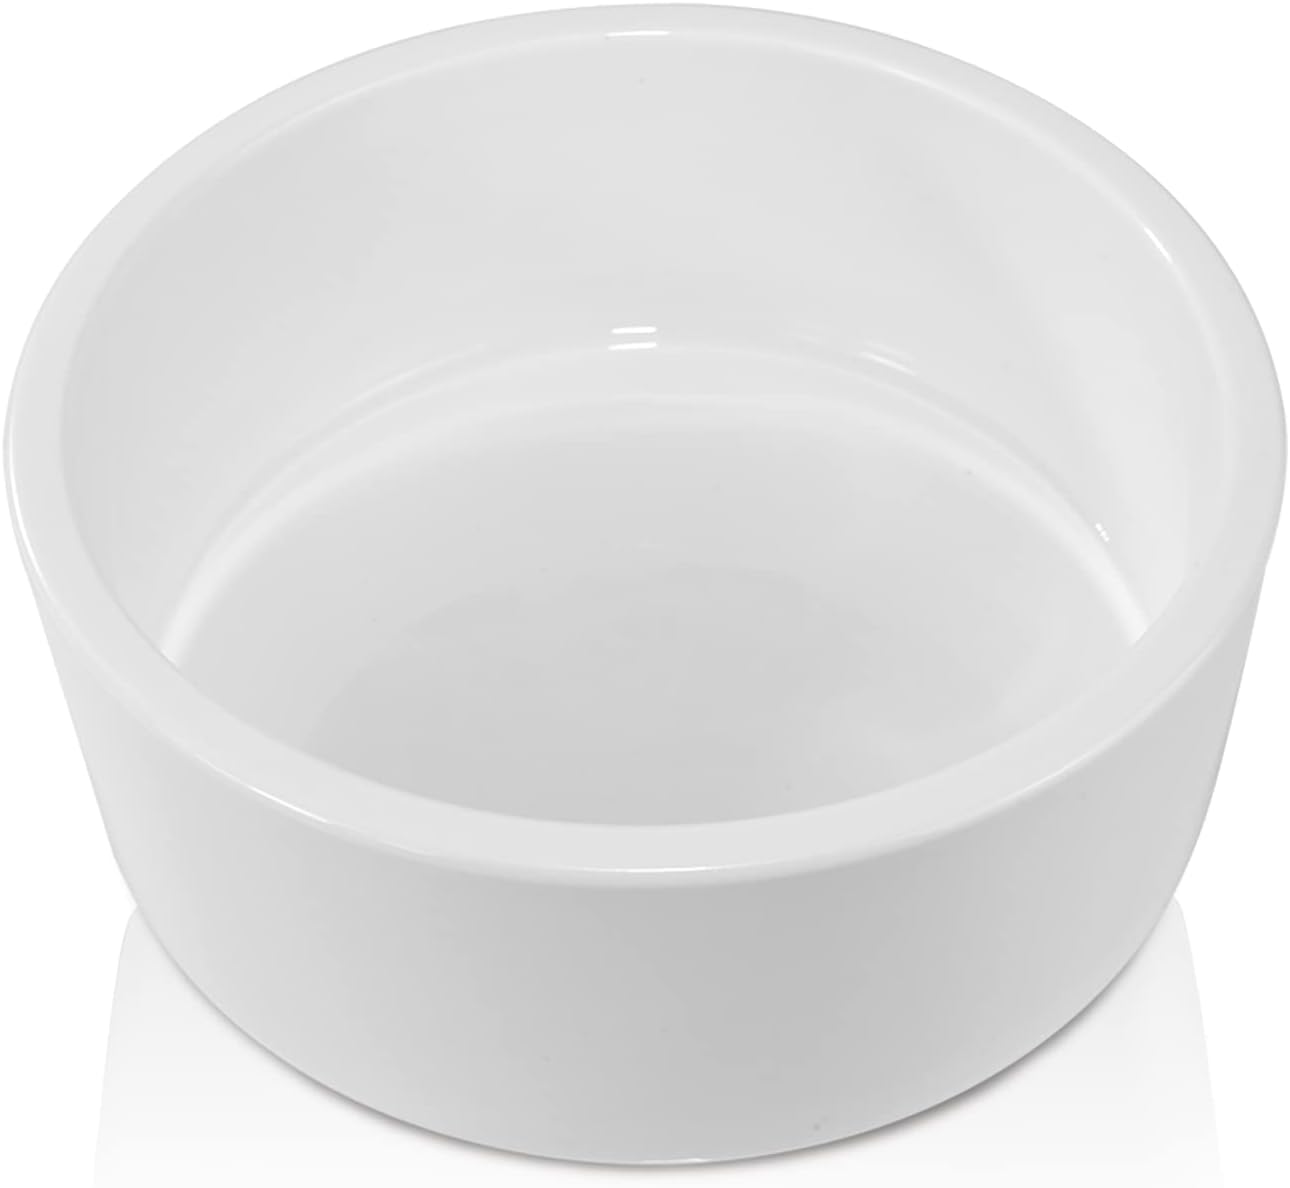 6 pack- Large Sublimation Pet bowl 7 x 3 inches with AAA Coating -  | Reinforced Styrofoam Packaging"